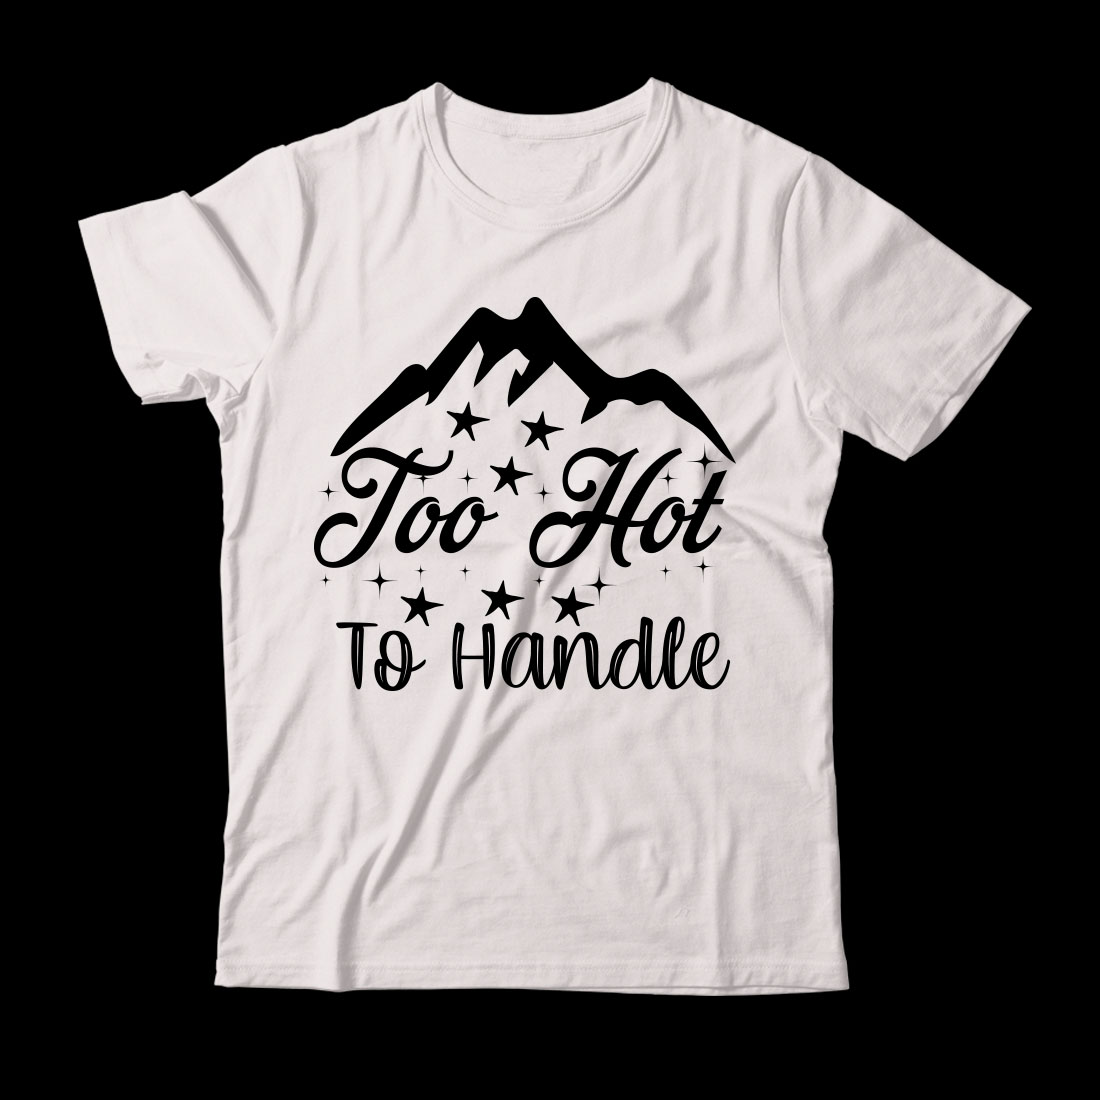 White t - shirt that says too hot to handle.